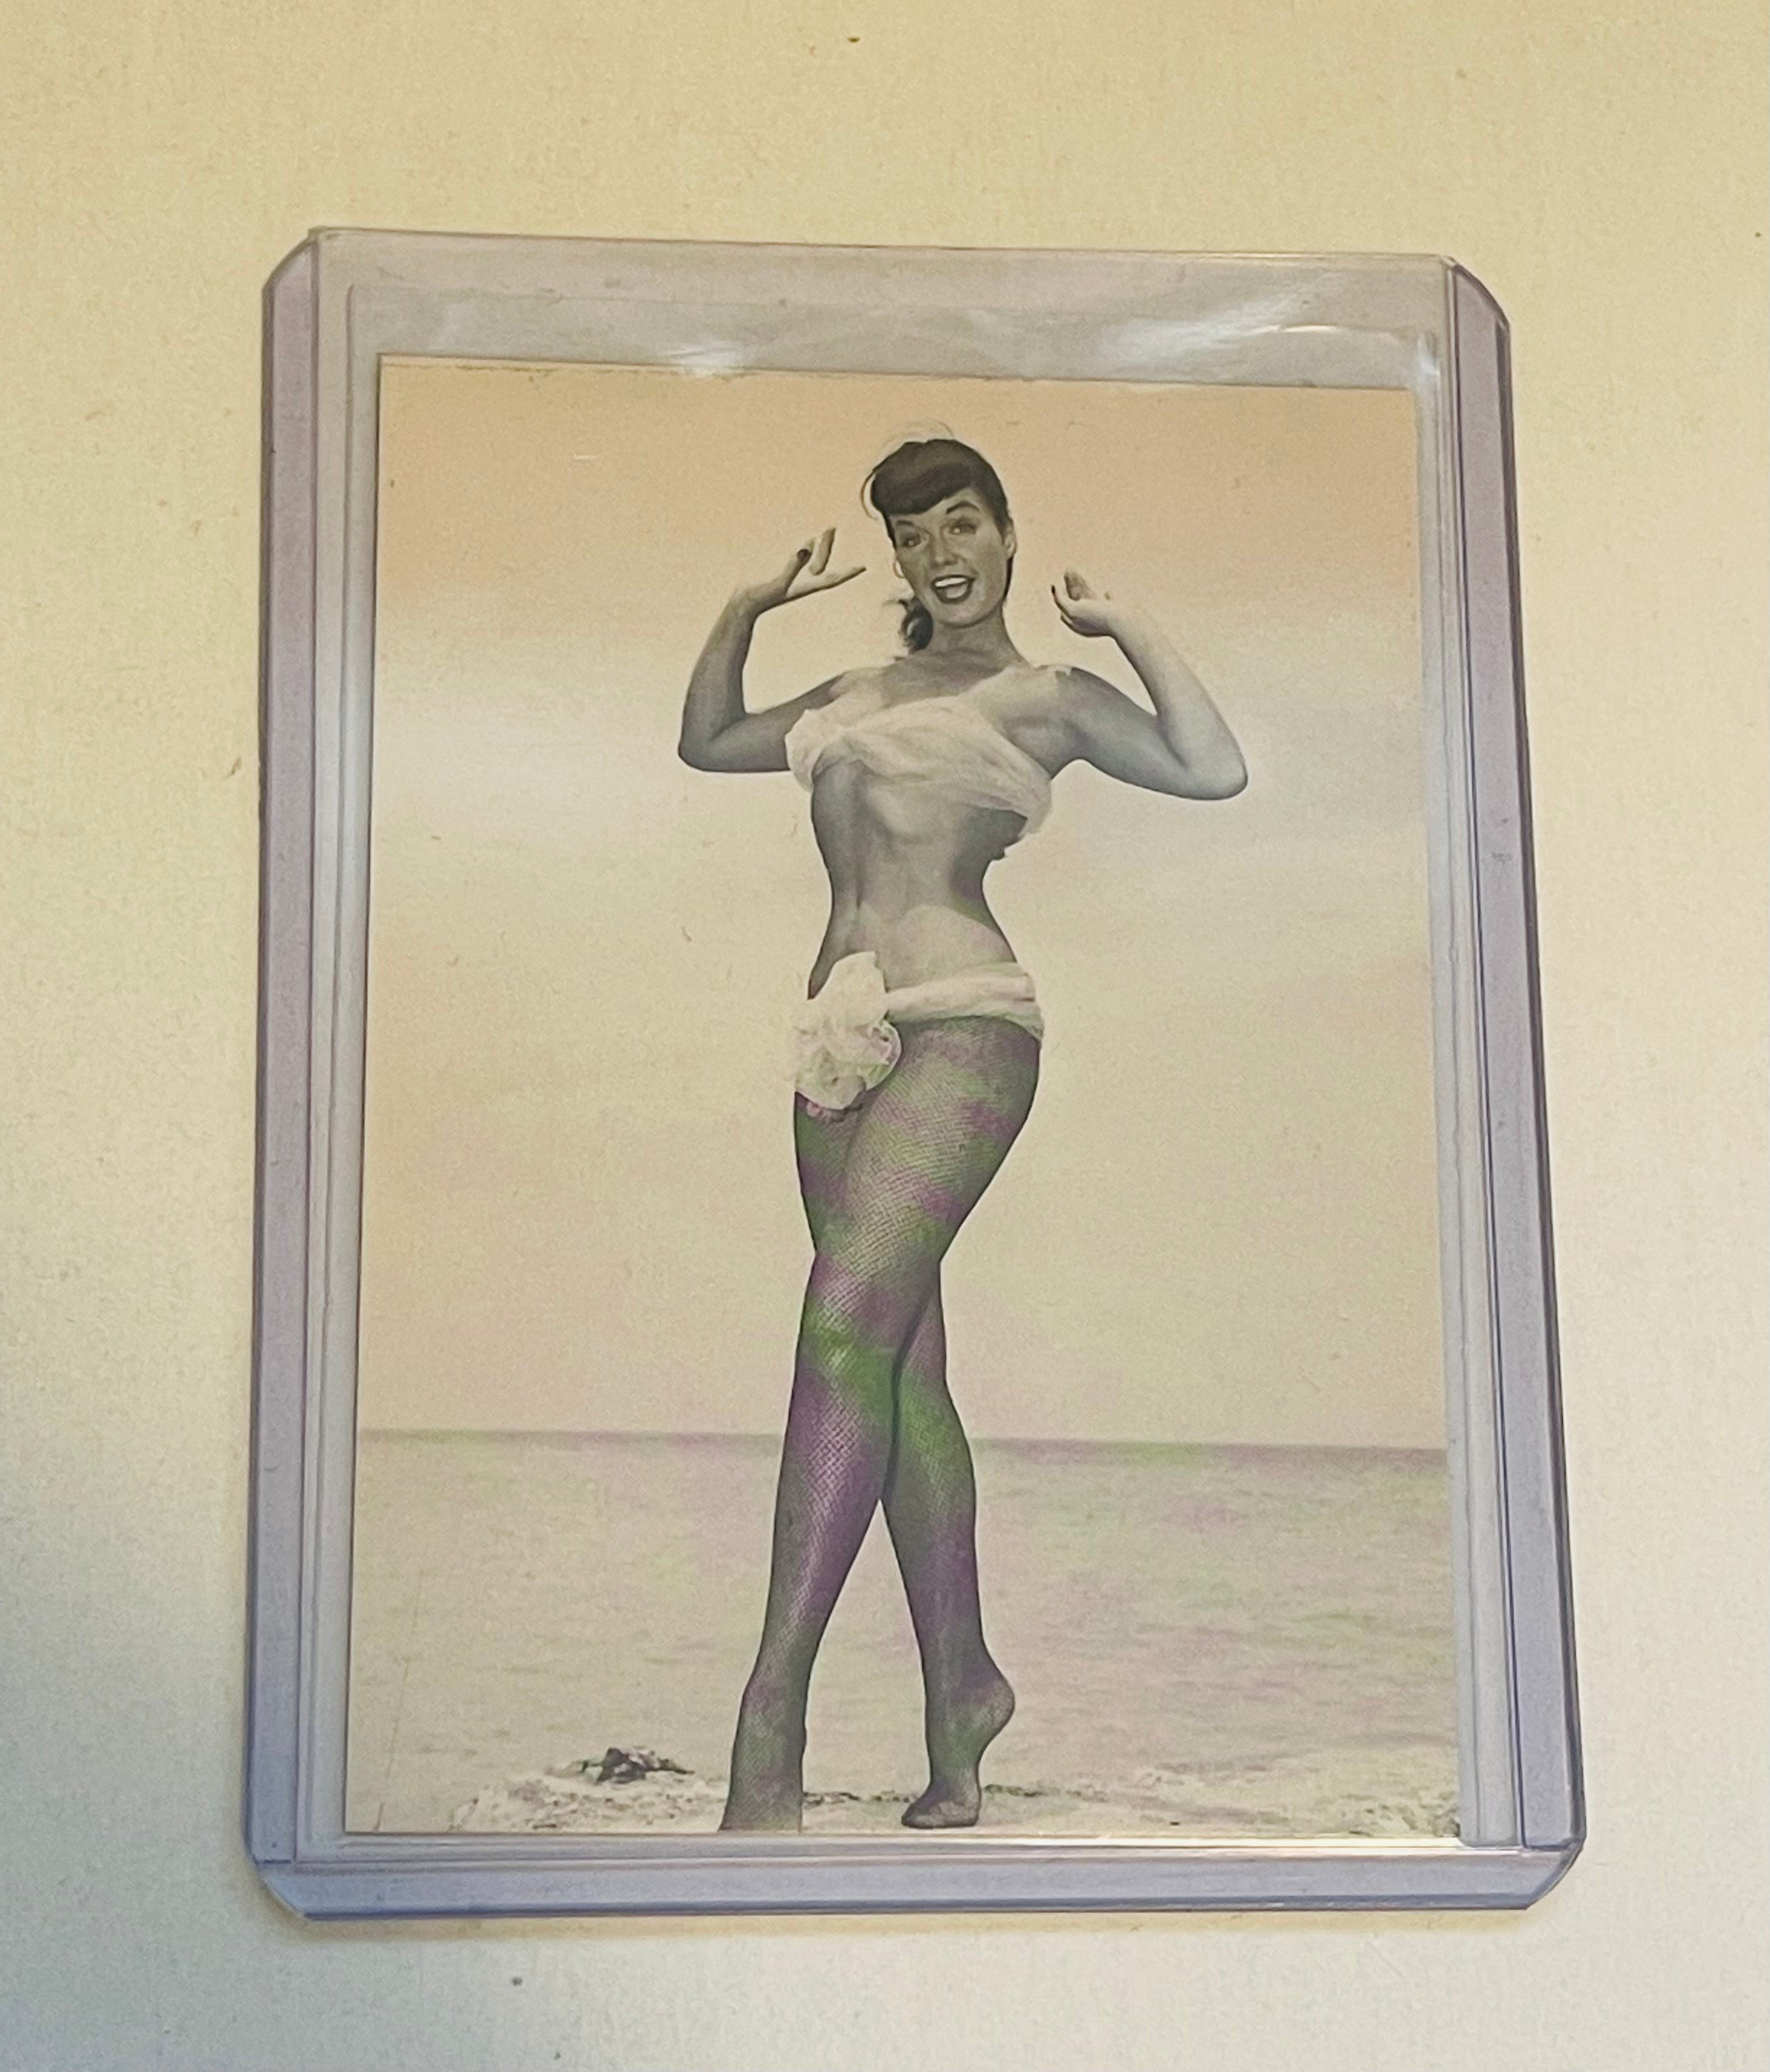 Bettie Page pin-up Girl legend rare promo card 1996